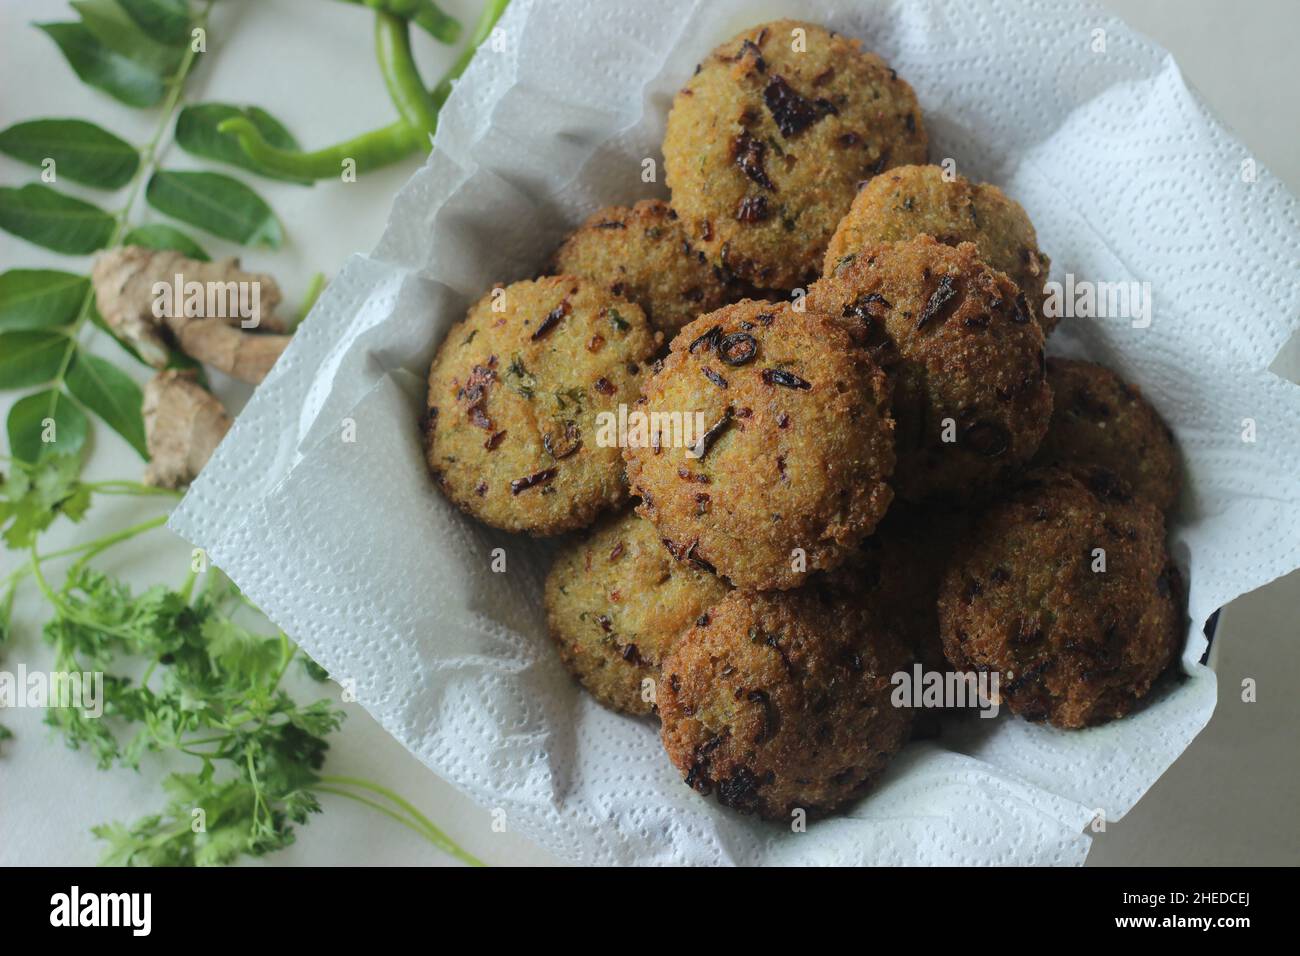 Kodo millet fritters. A crispy fritters made with cooked and mashed kodo millet flour and spices. Disk shaped deep fried evening snack. Commonly known Stock Photo